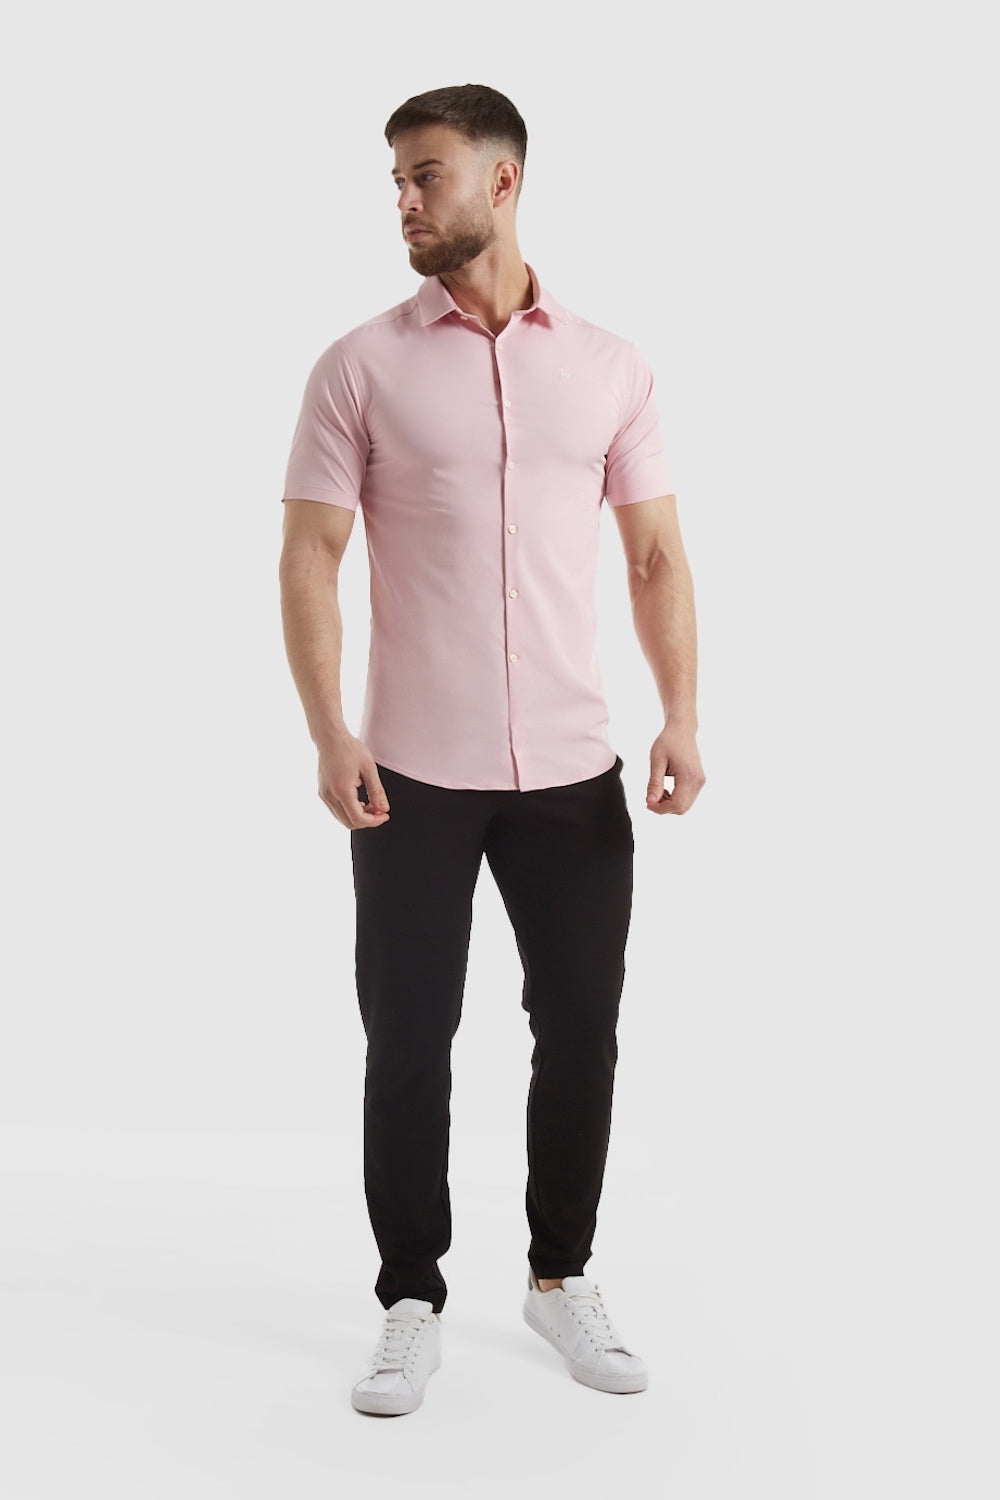 Muscle Fit Bamboo Shirt (SS) in Pink - TAILORED ATHLETE - ROW